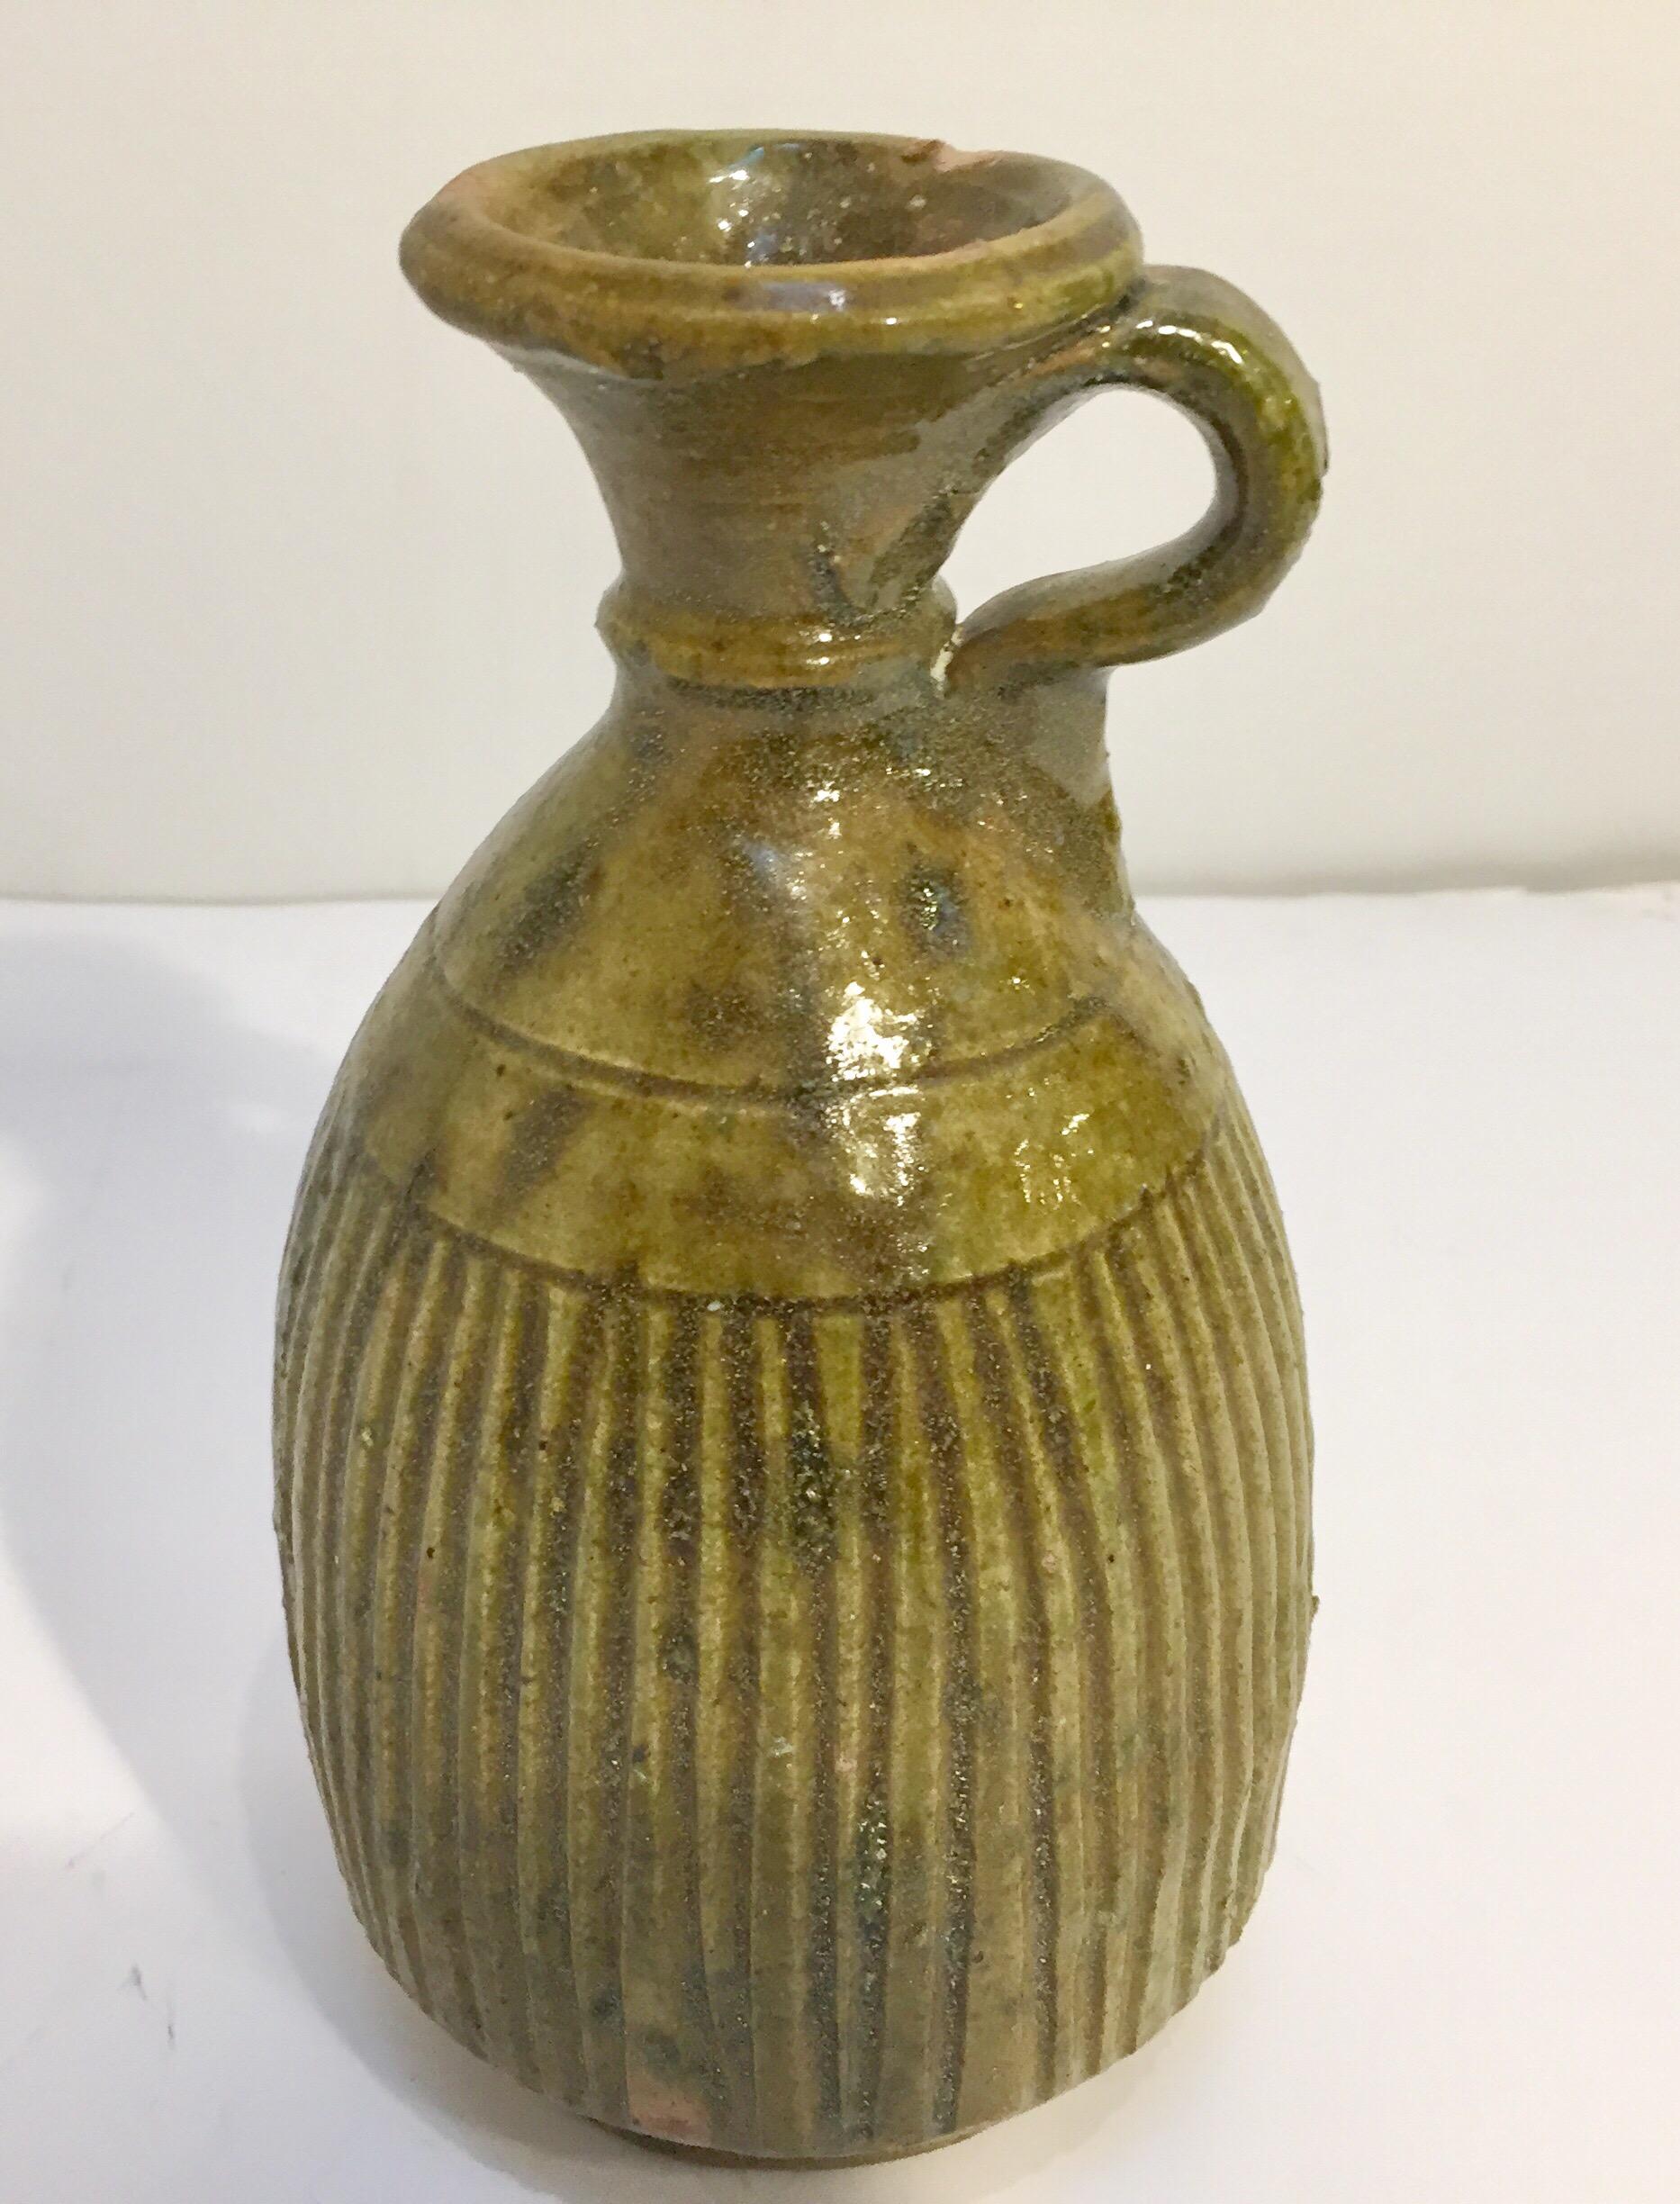 Moroccan green glazed decorative terra cotta jar used for olive oil.
Wonderful green and brown shimmering that can be found only in south Morocco in the village of Tamgroute..
These green Jars were used to store olive oil, vinegar, butter, the